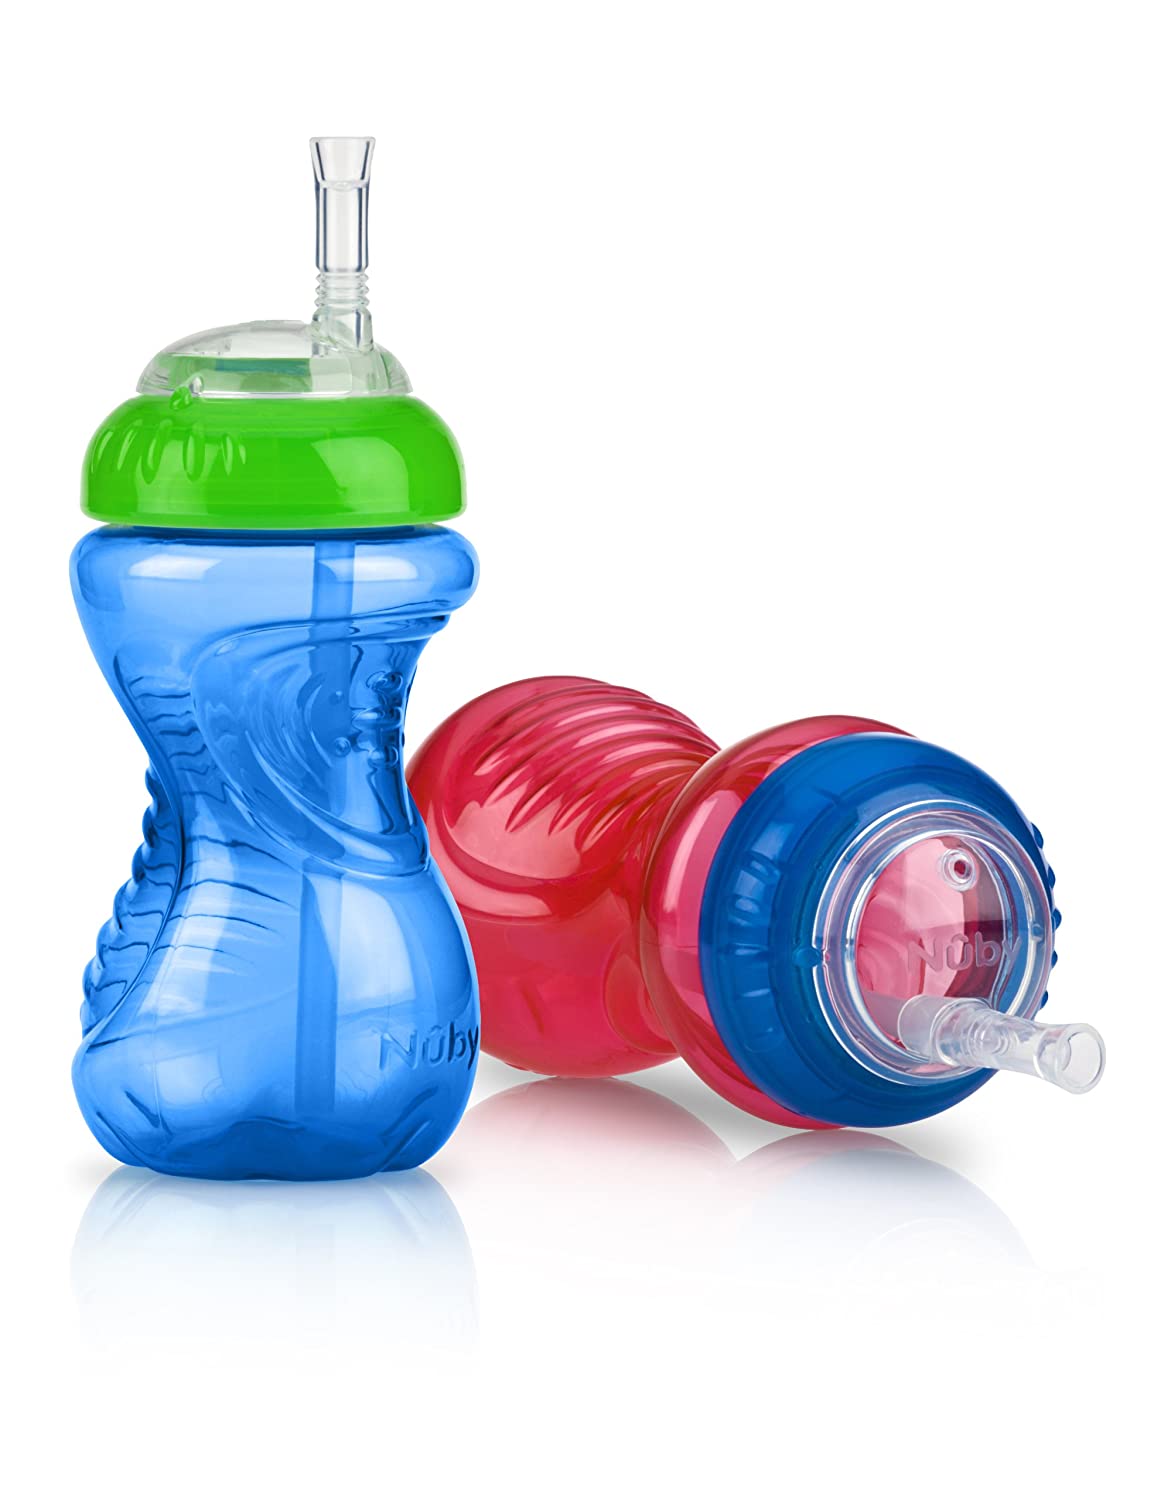 Nuby No-Spill Cup with Flex Straw